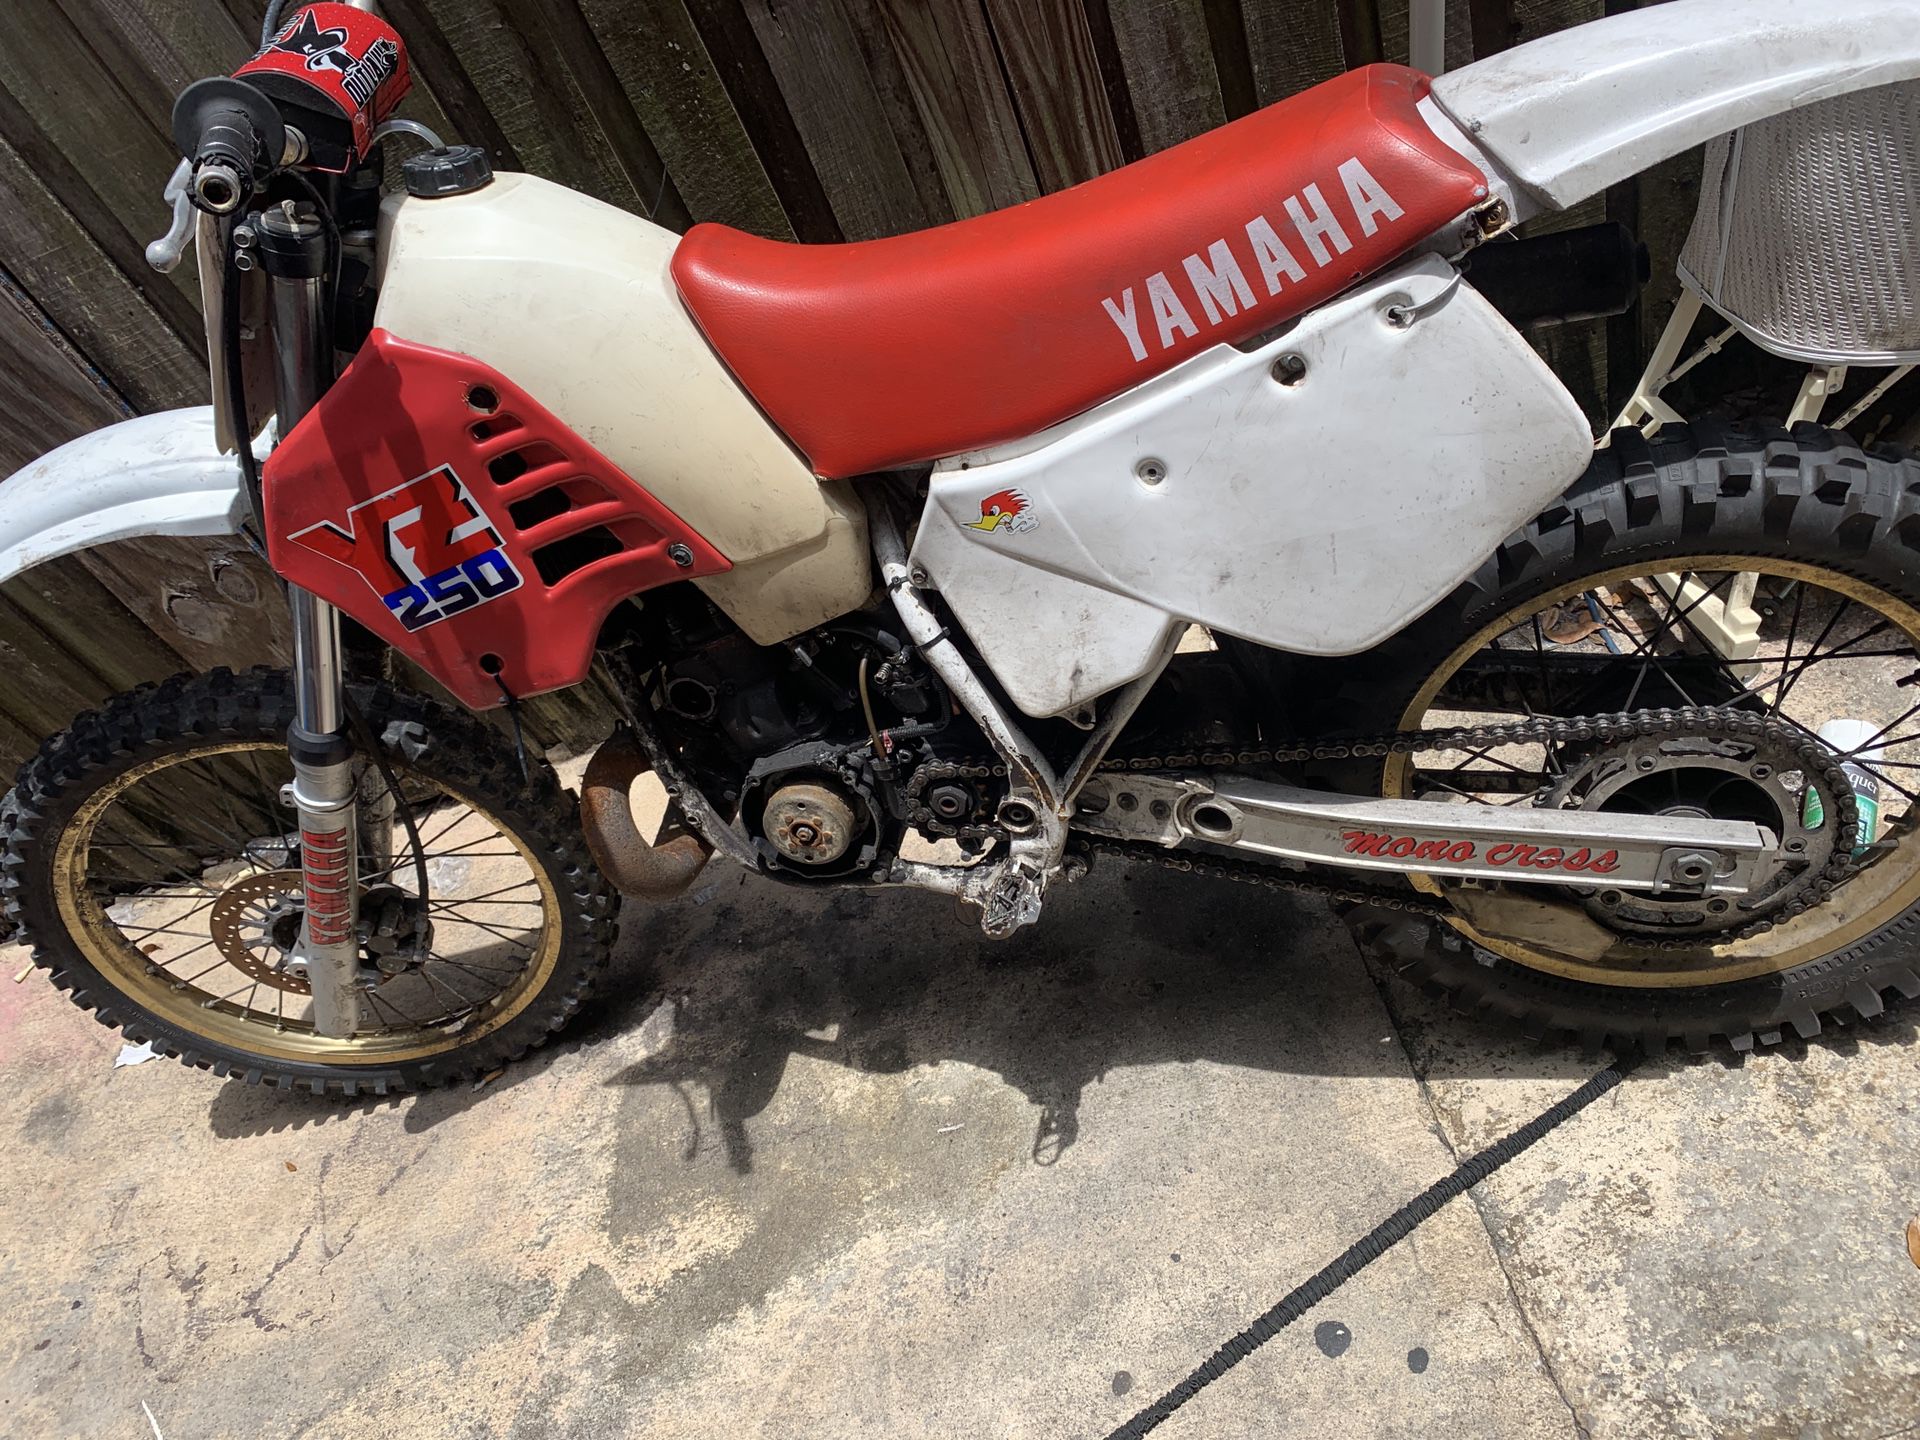 Yz250 needs magneto an stator , come get it 1250